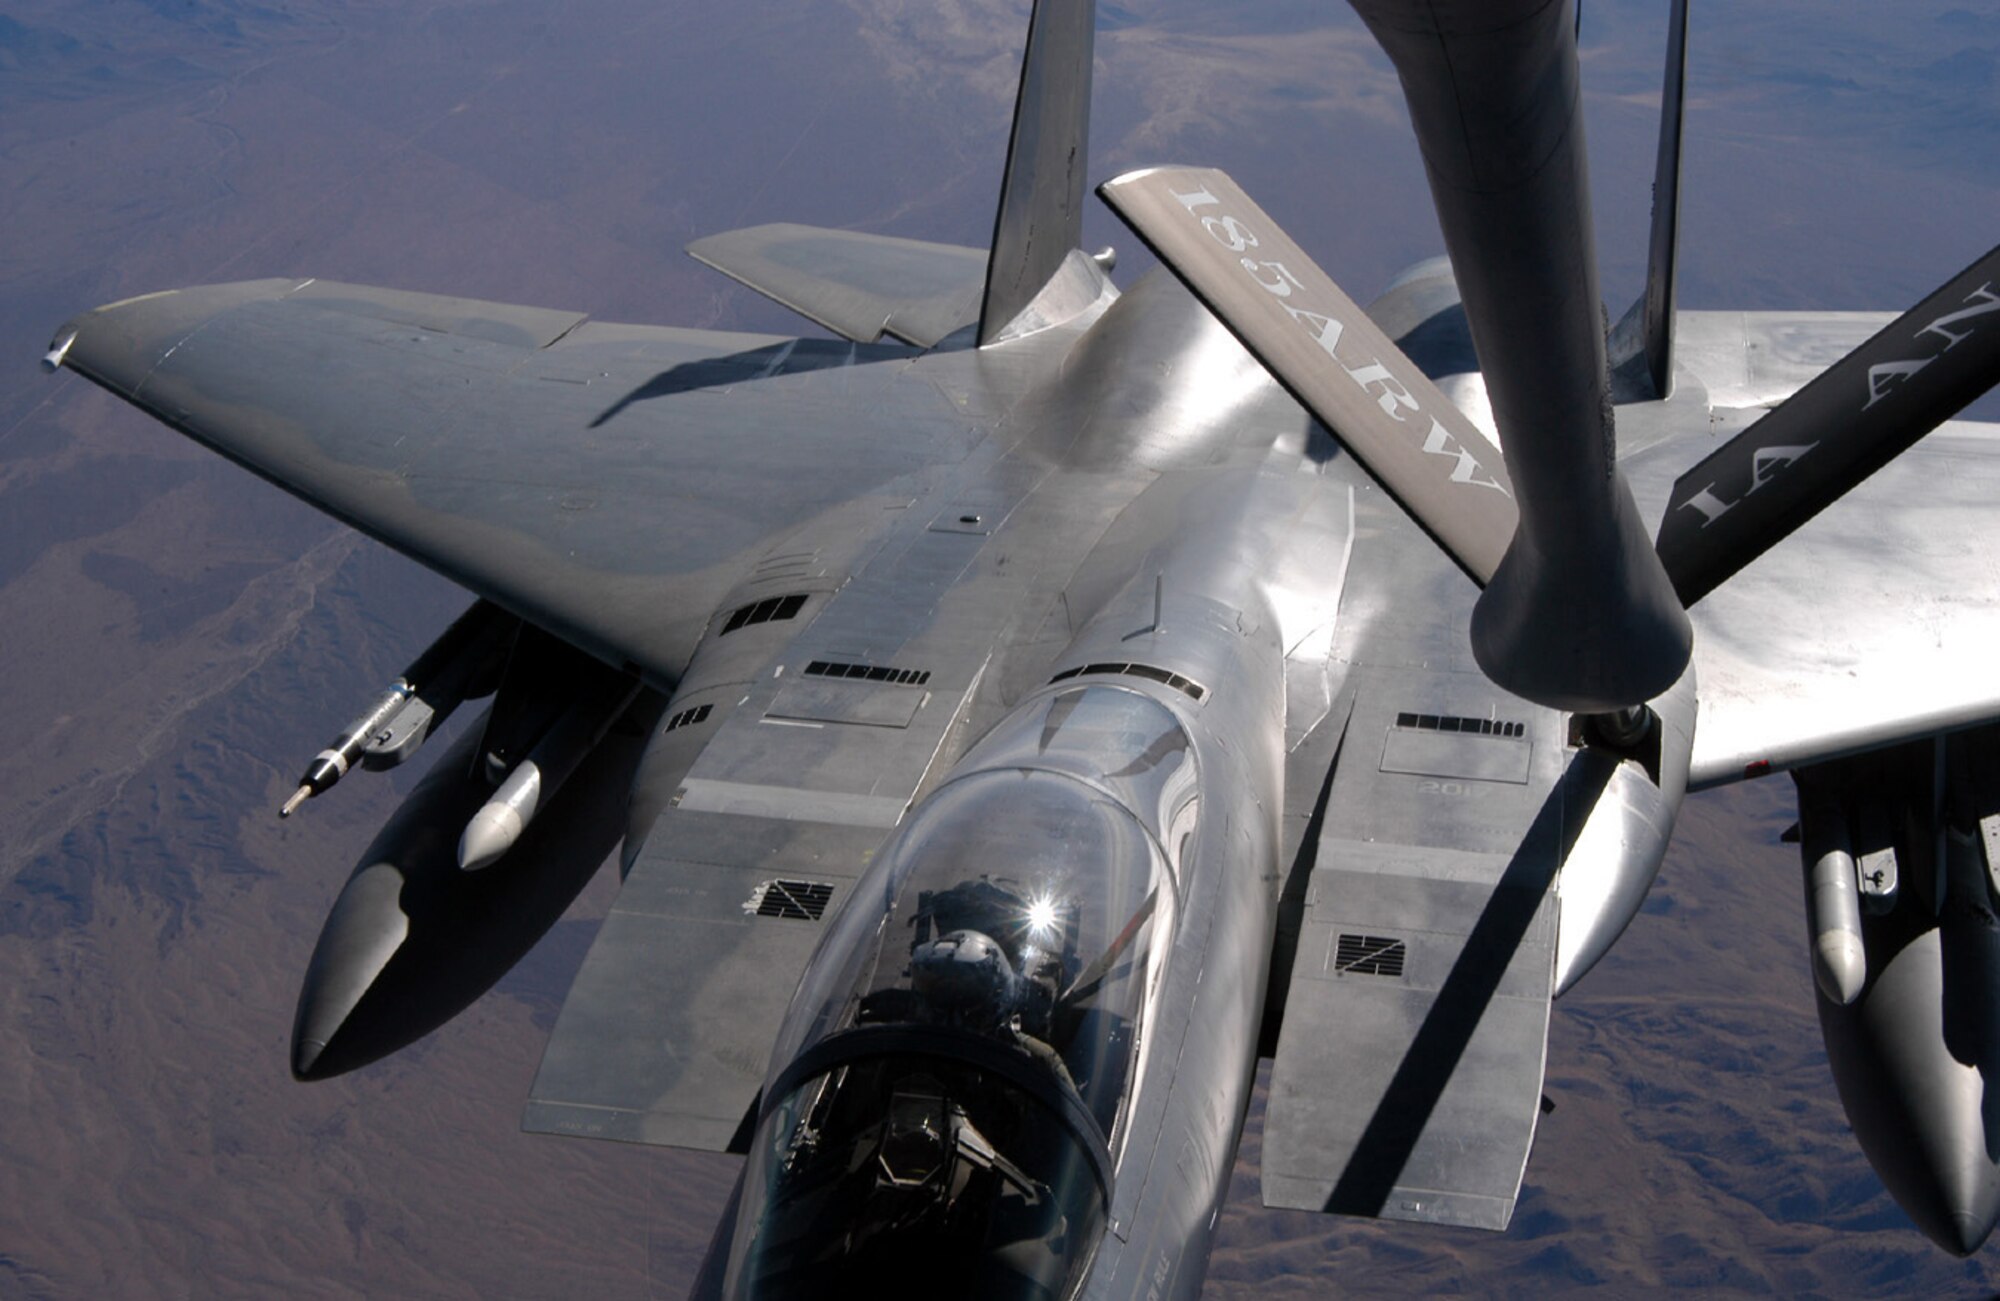 A KC-135 Stratotanker from the 185th Air Refueling Wing, Iowa Air National Guard, refuels an F-15C Eagle assigned to the 67th Fighter Squadron, Kadena Air Base, Japan, during Red Flag 09-1 at Nellis Air Force Base, Nev., Oct. 24. (U.S. Air Force photo/Staff Sgt. Kenya Shiloh)